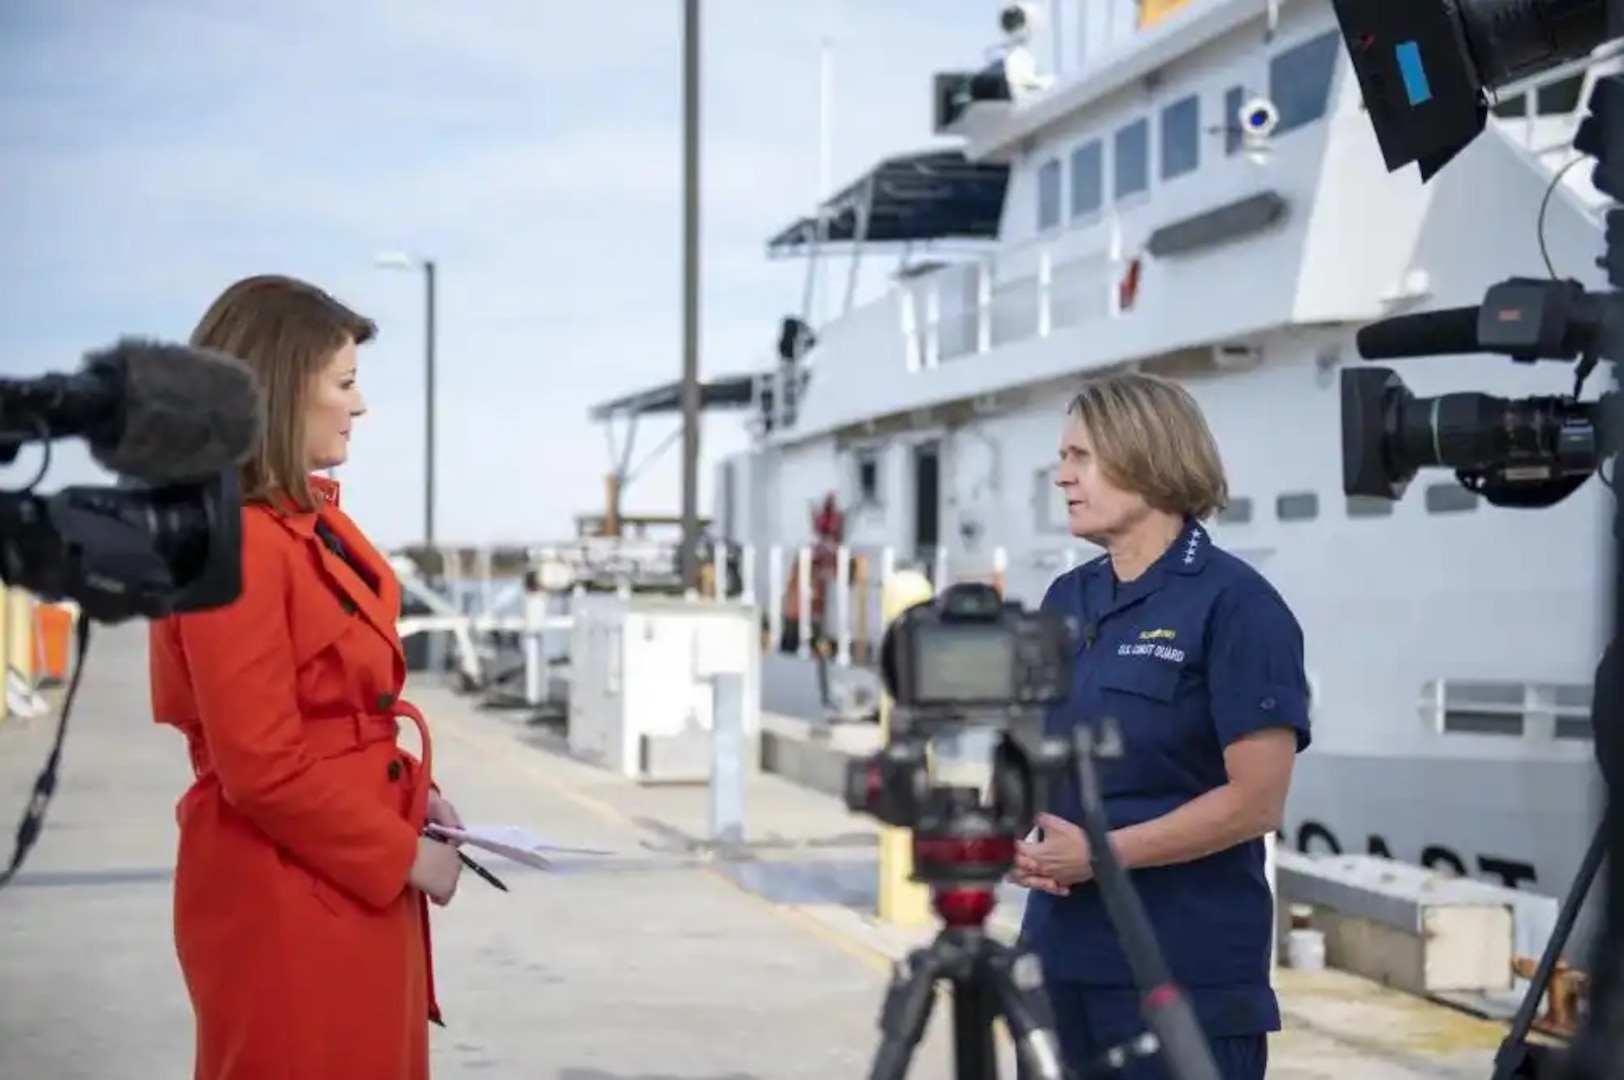 Coast Guard Adm. Linda Fagan, commandant of the U.S. Coast Guard, conducts an on-camera interview with Nora O'Donnell, CBS news anchor, on the cutter pier at U.S. Coast Guard Training Center Cape May, N.J., Nov. 29, 2022. During the interview, Fagan and O'Donnell discussed the Coast Guard's missions, people, and recruiting efforts. (U.S. Coast Guard photo by Petty Officer 2nd Class Shannon Kearney)